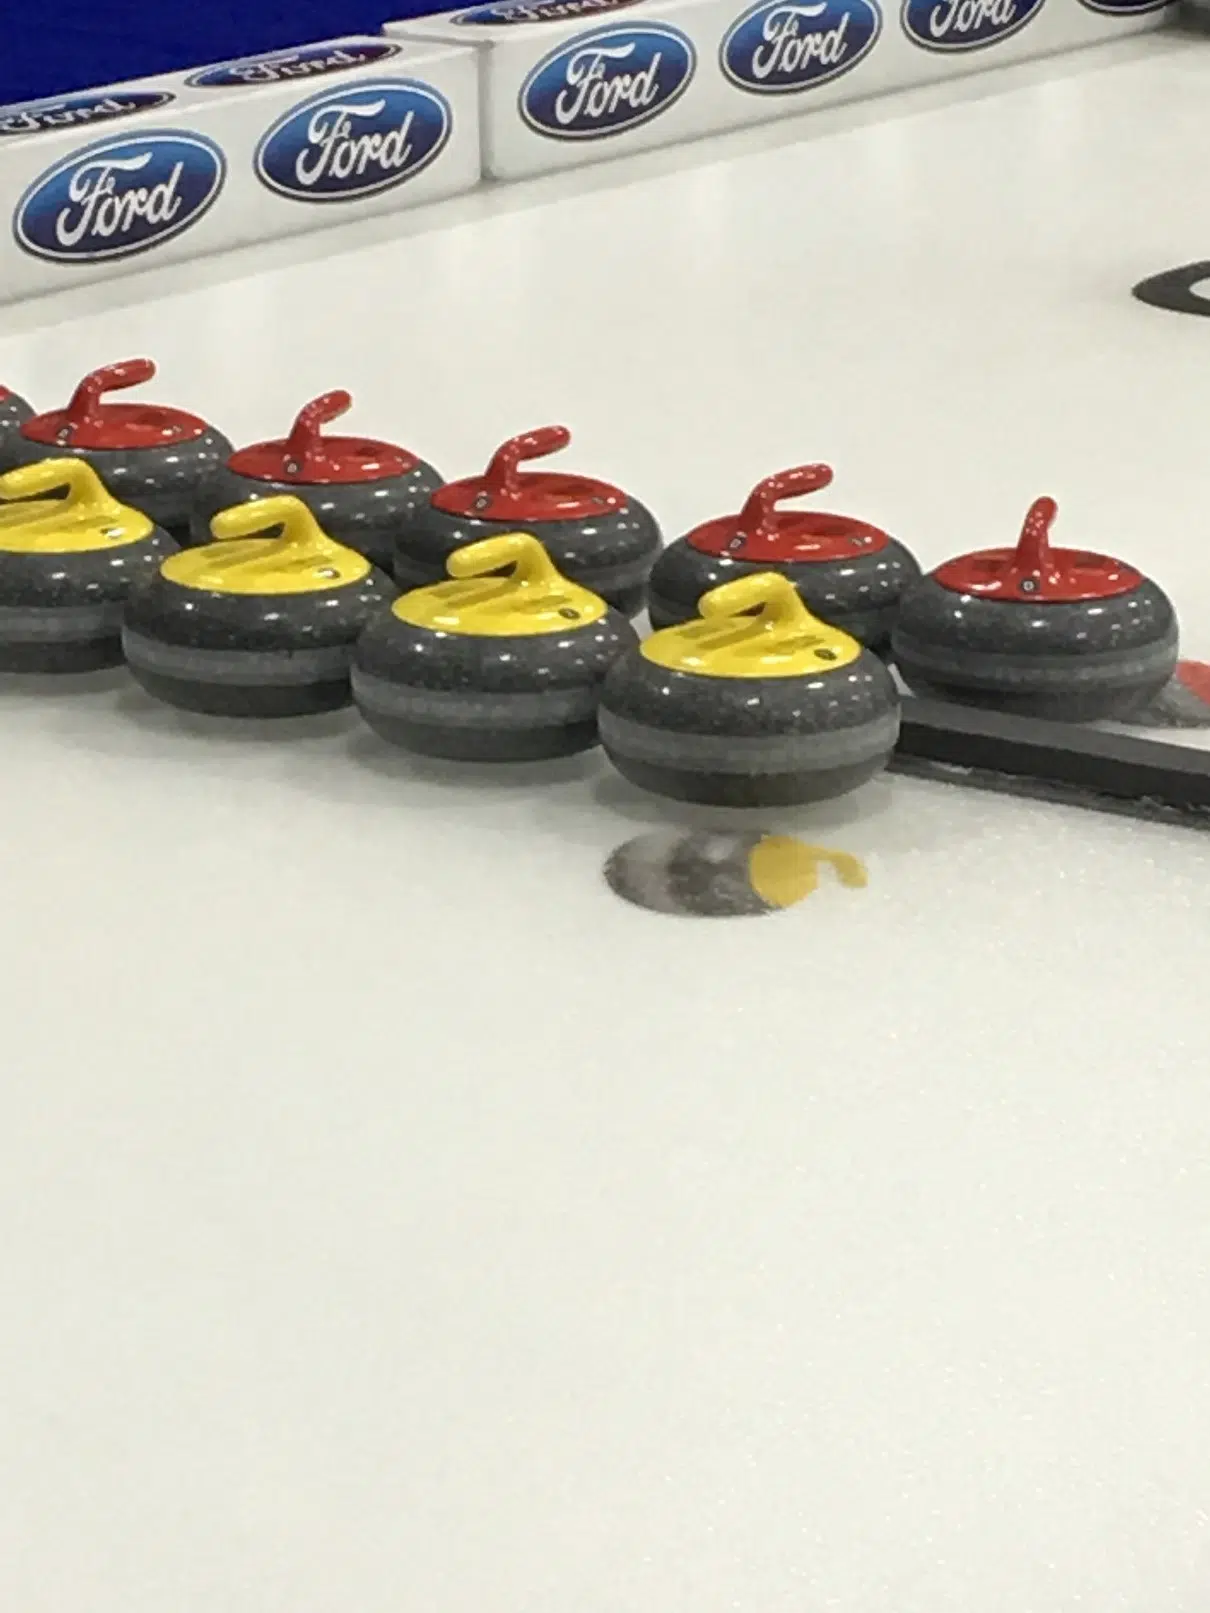 Who Will Host The 2020 Curling Brier?